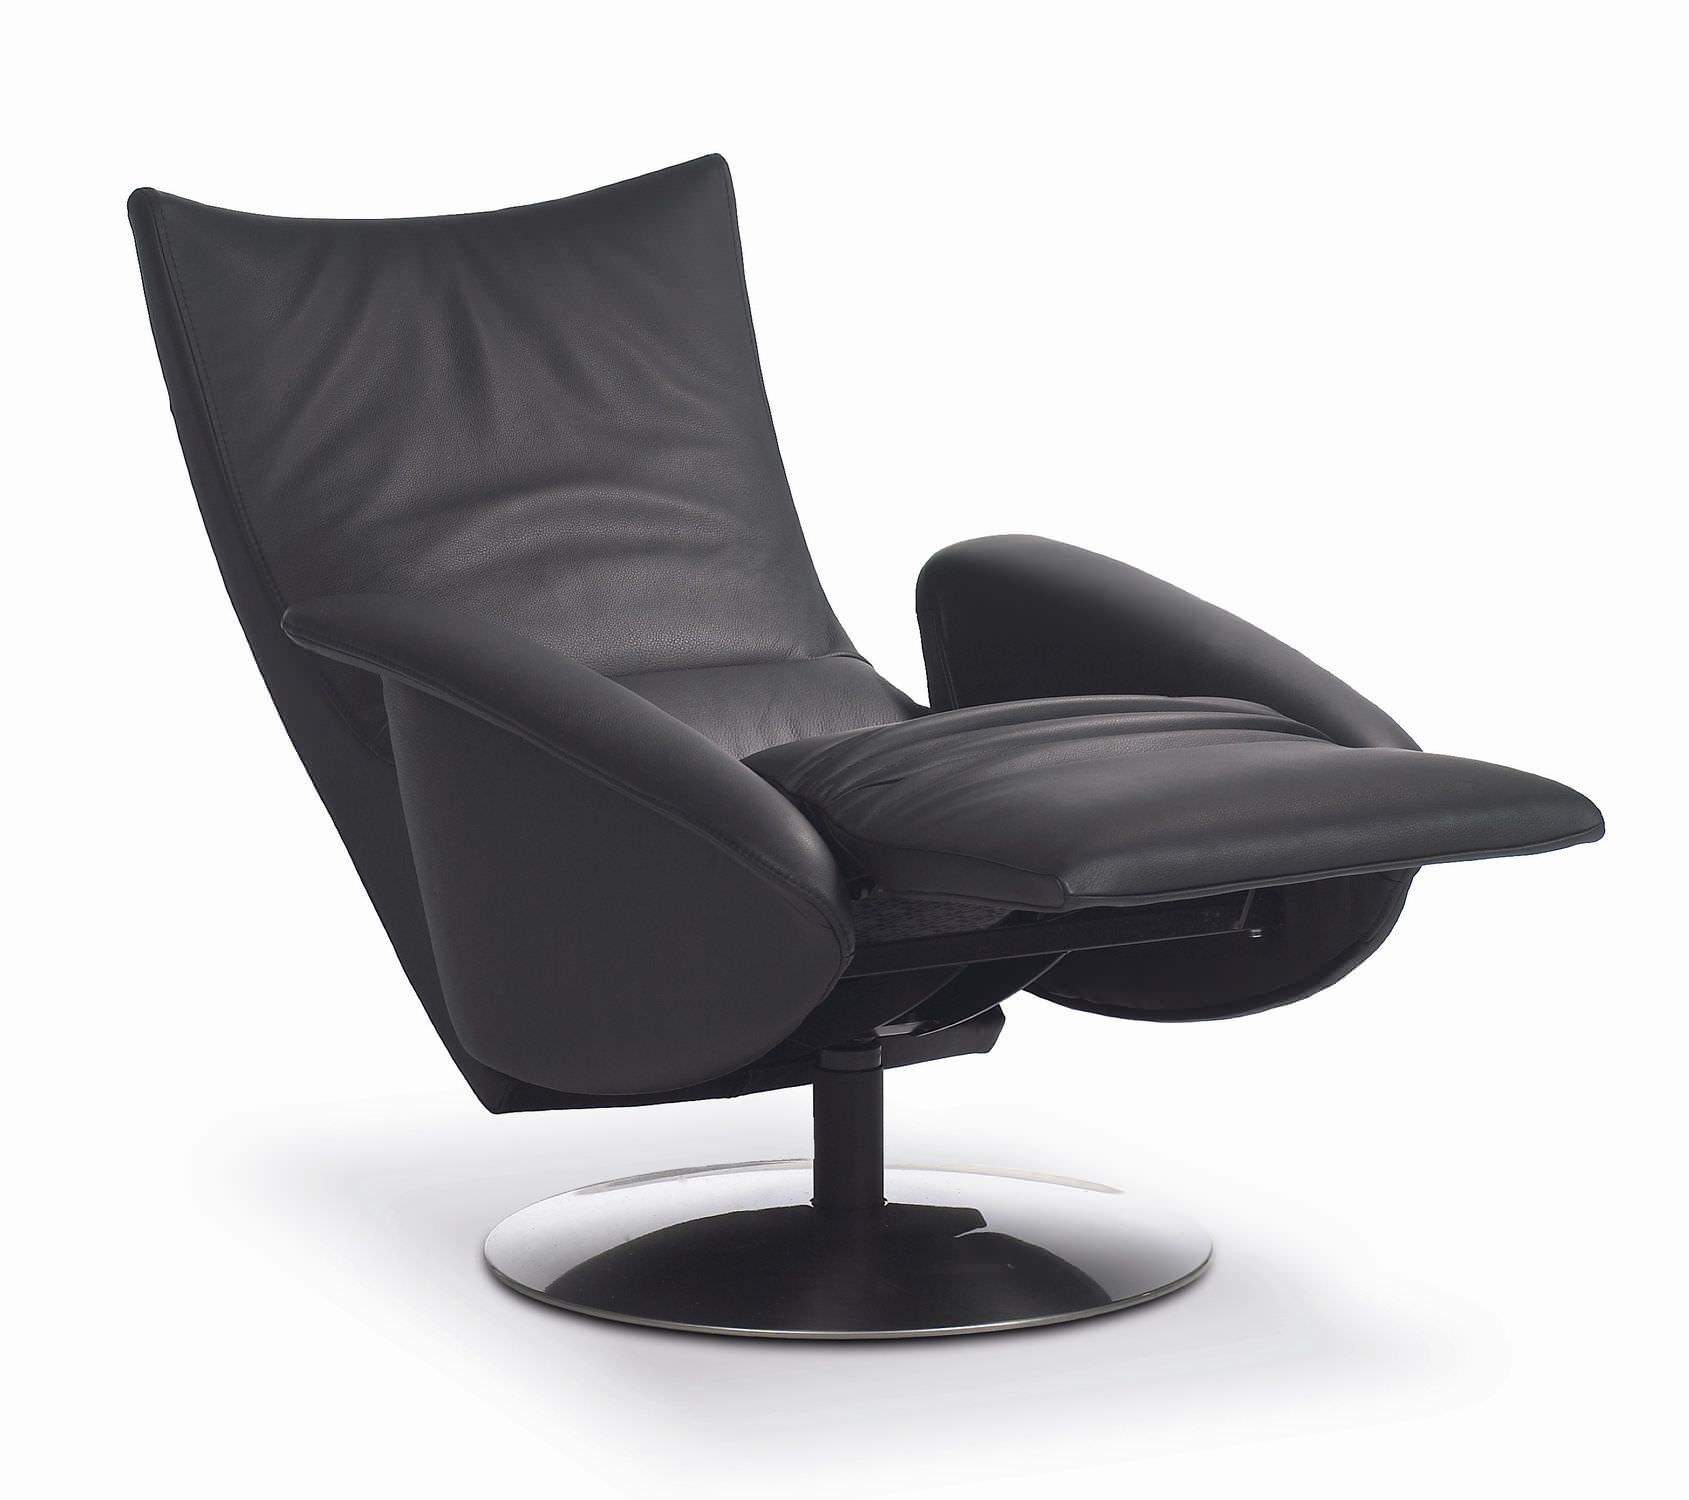 Contemporary leather recliner chairs a dark colors with modern and